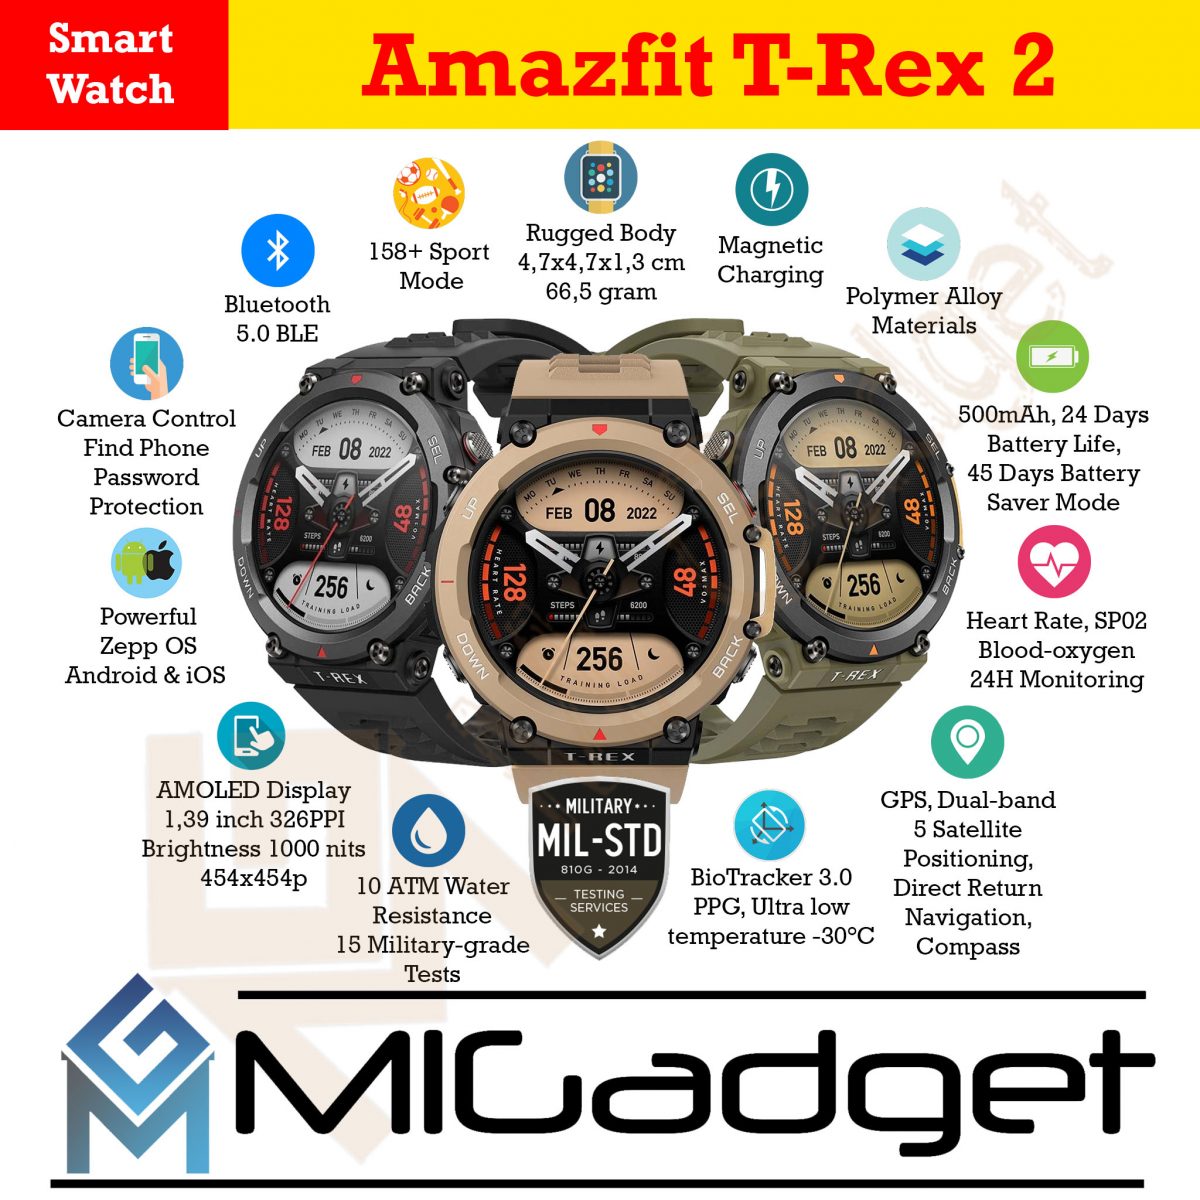 Full Steam Ahead: Our Hands-On Amazfit T-Rex 2 Review Will Get Your Heart Racing